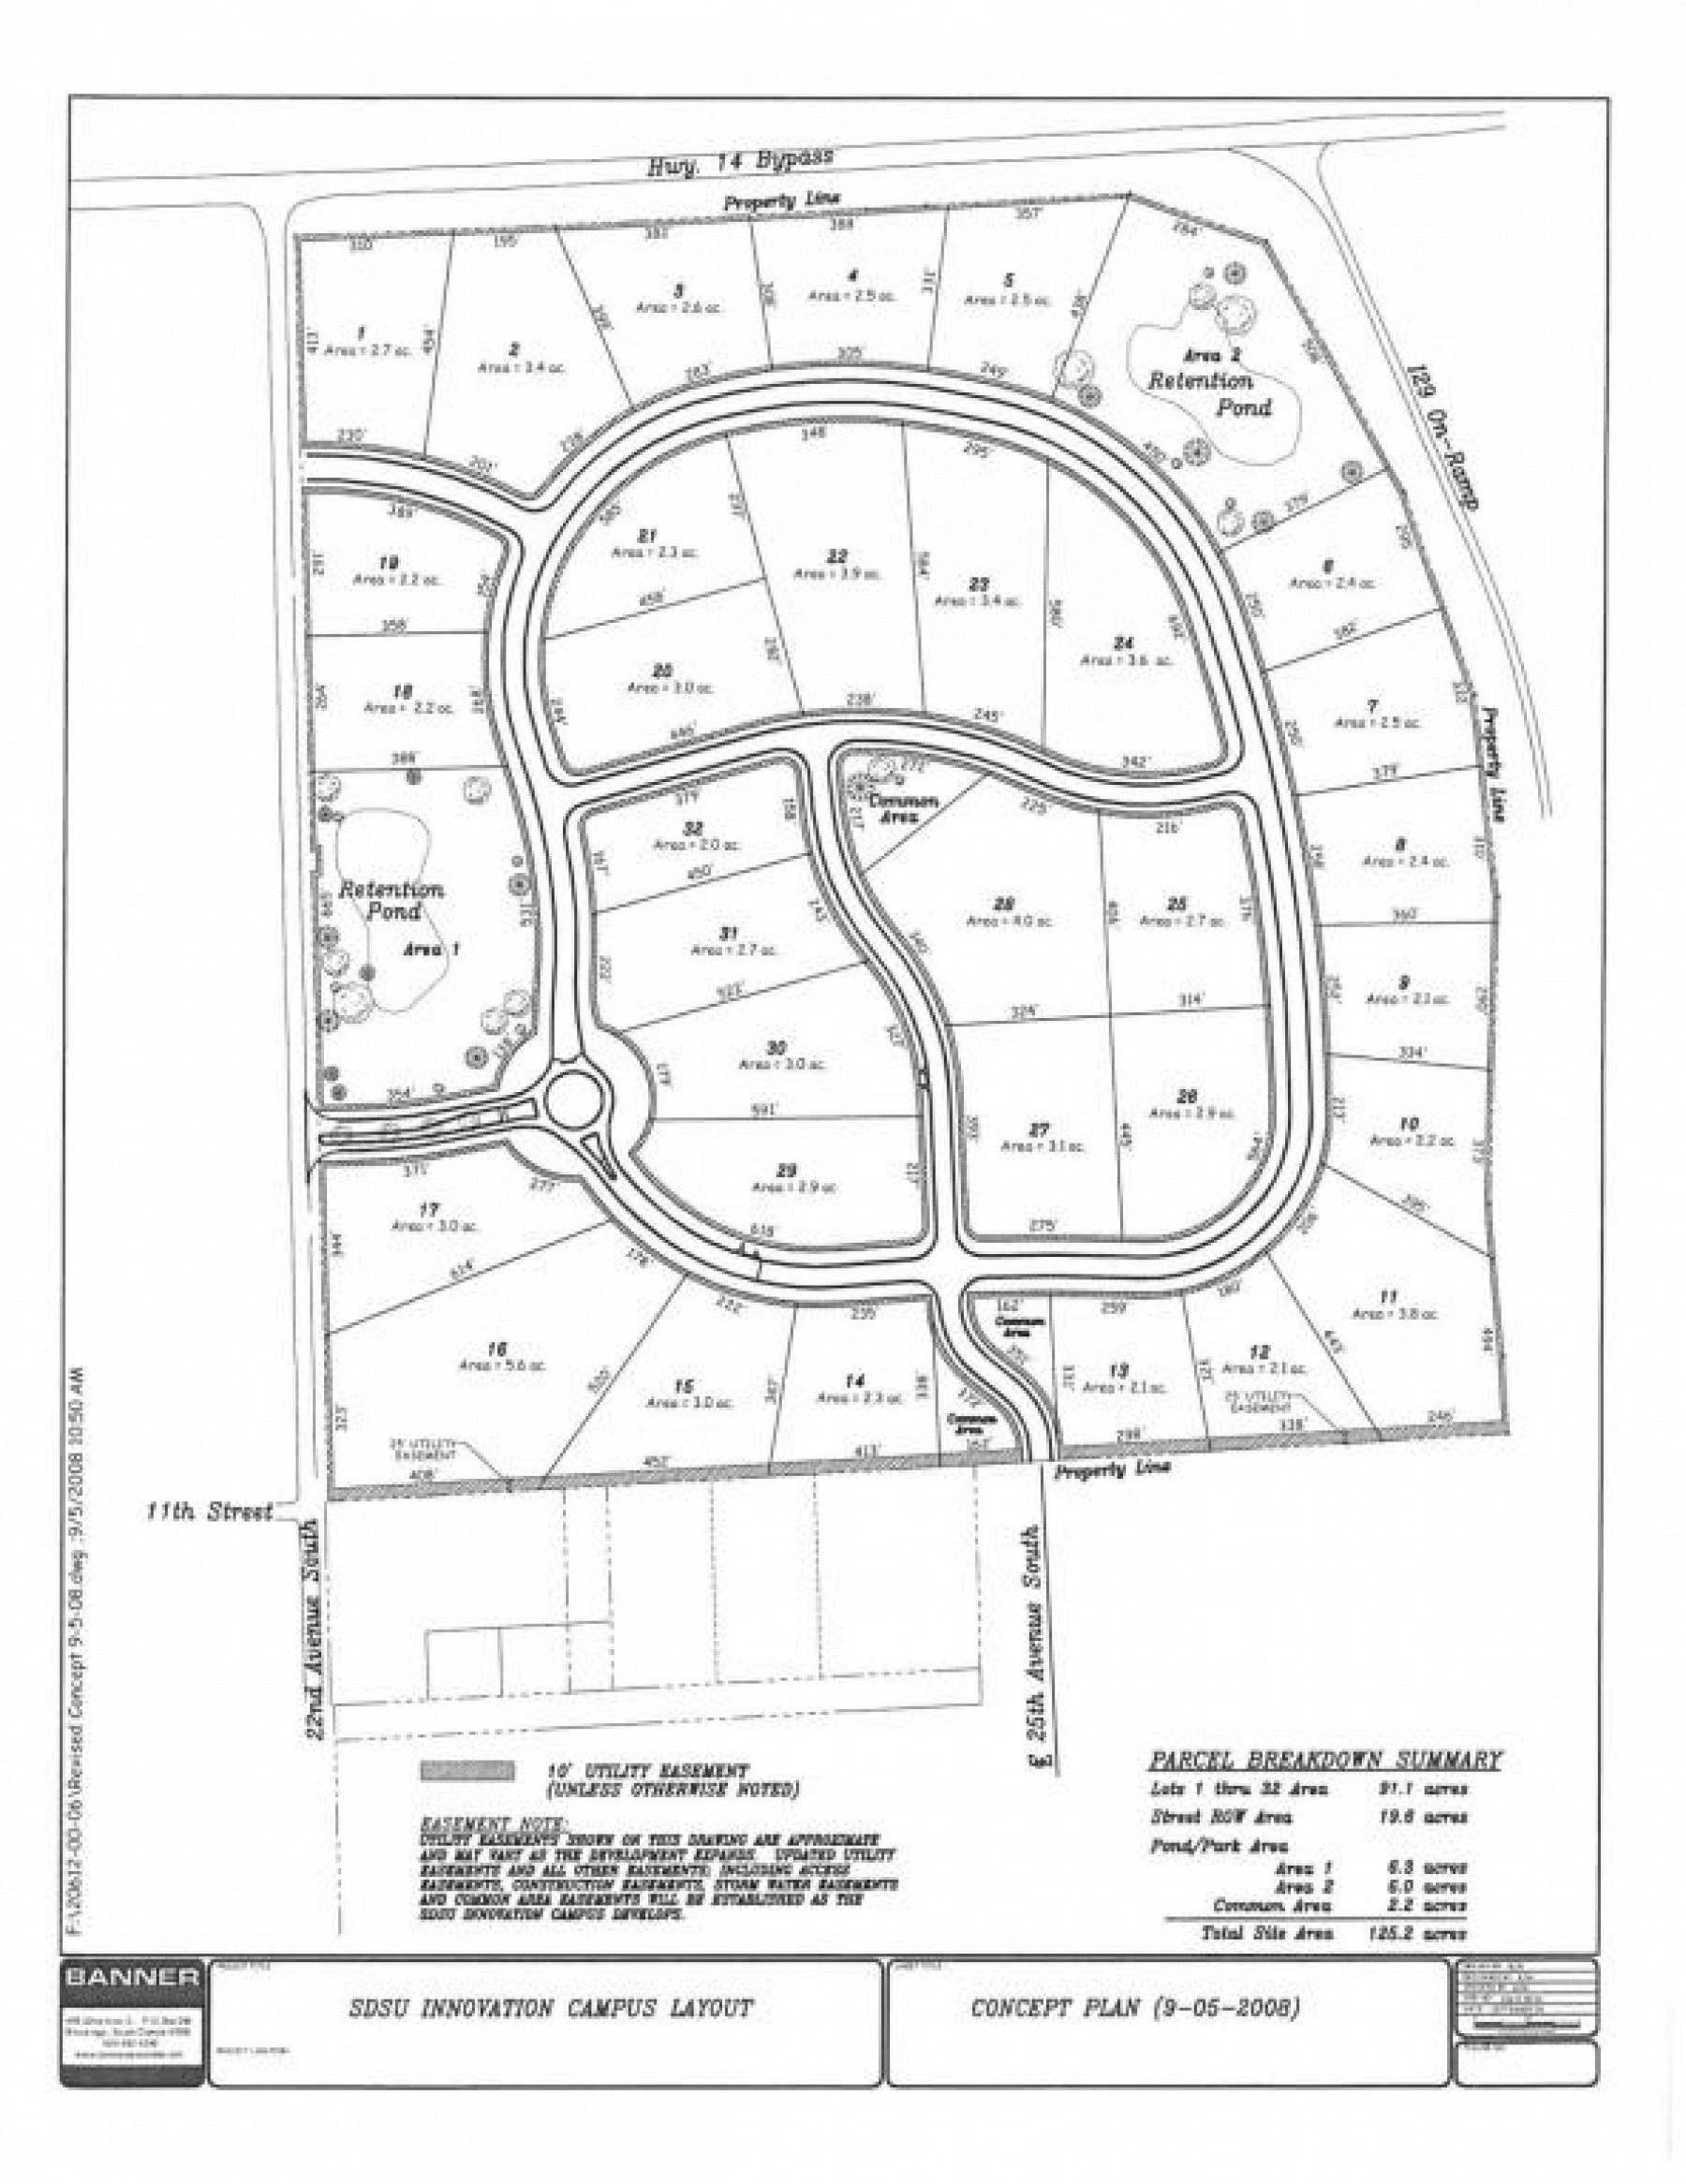 Lot 8 Innovation Campus, Brookings, SD 57006